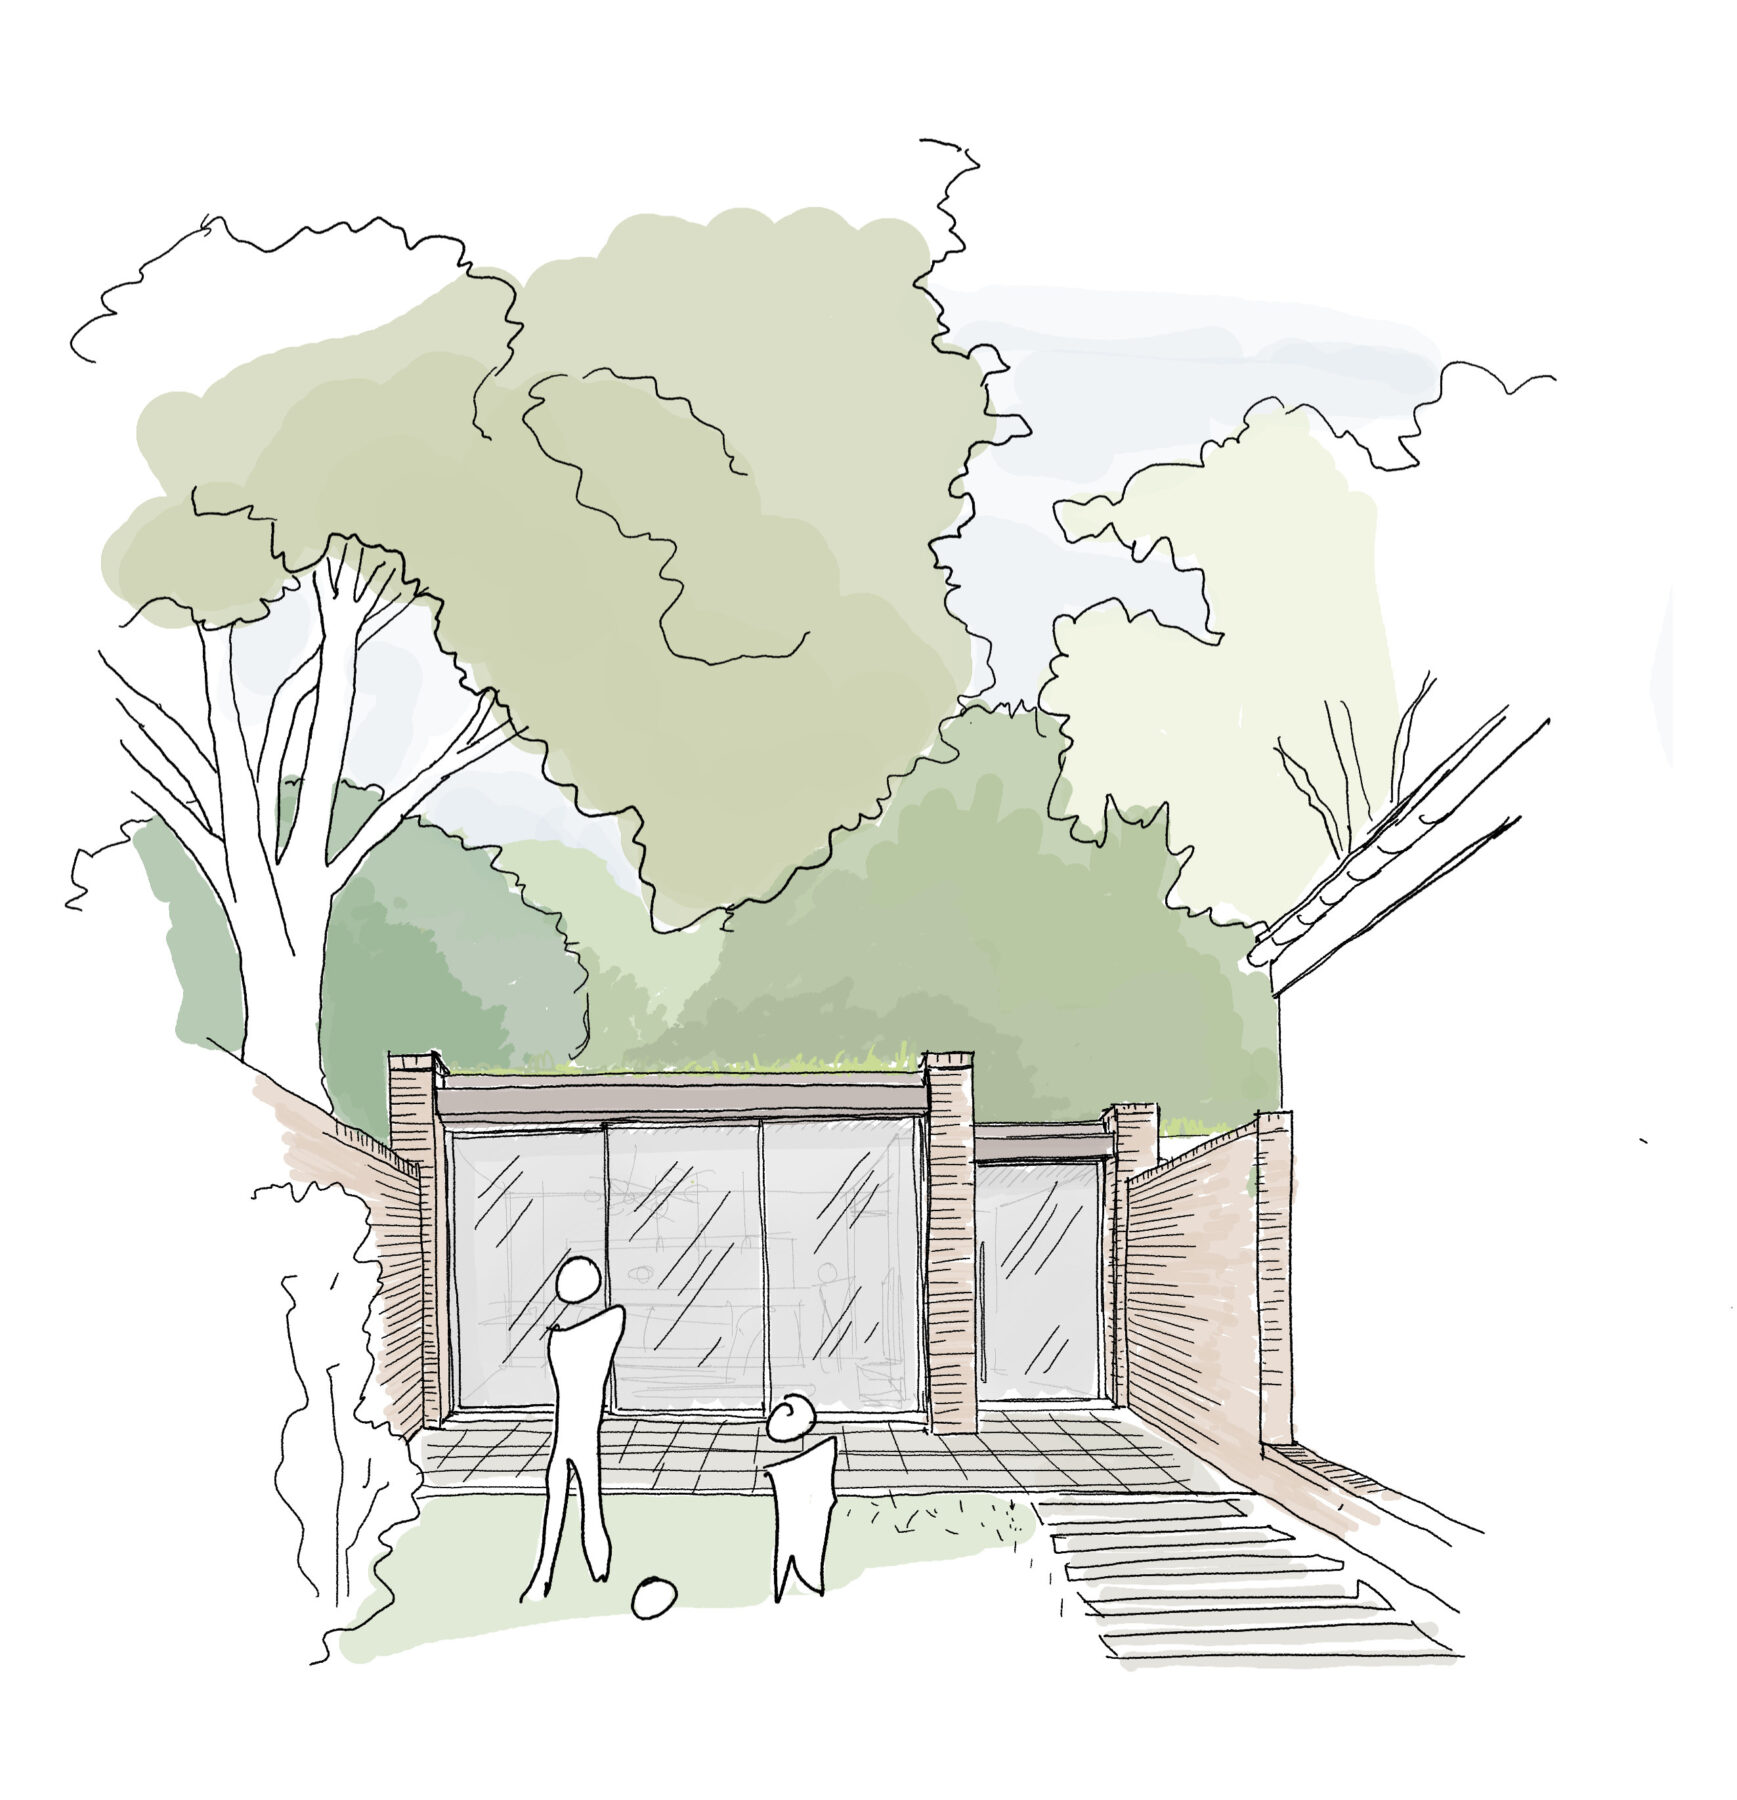 Sketch showing private family garden and house screened from the road by entrance gate